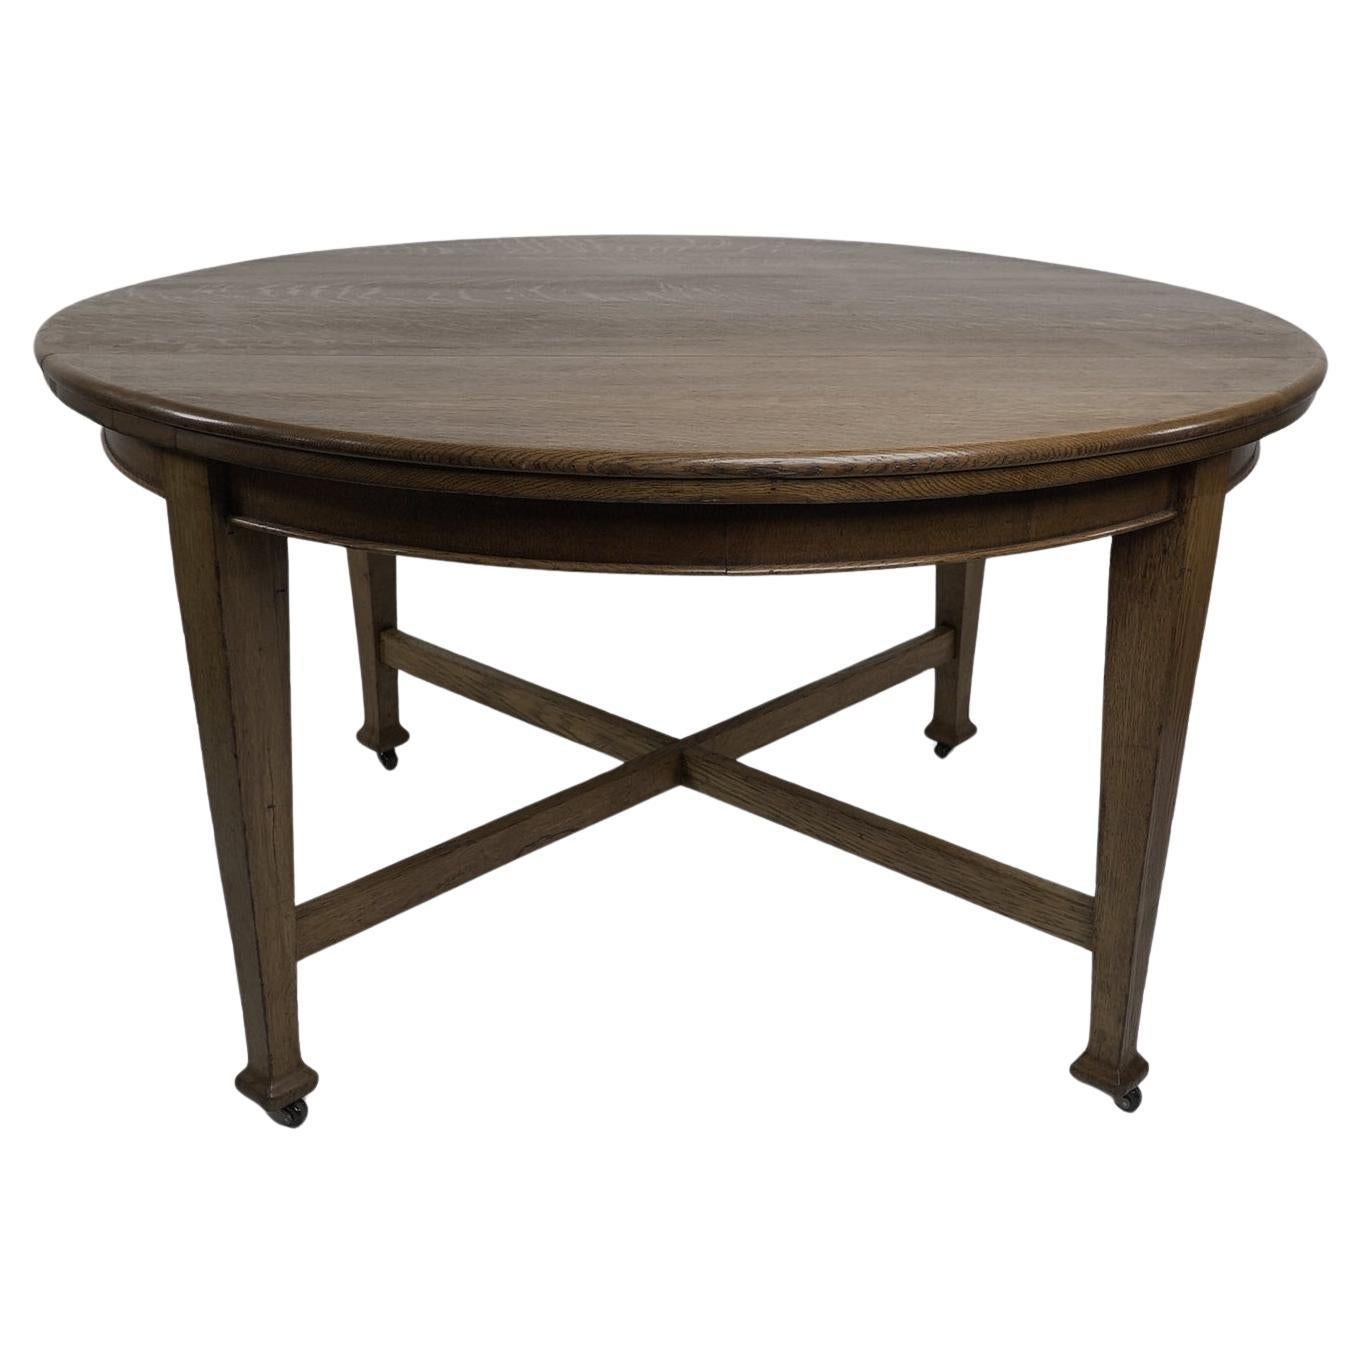 Jas Shoolbred. An Arts & Crafts round oak dining table with square tapering legs For Sale